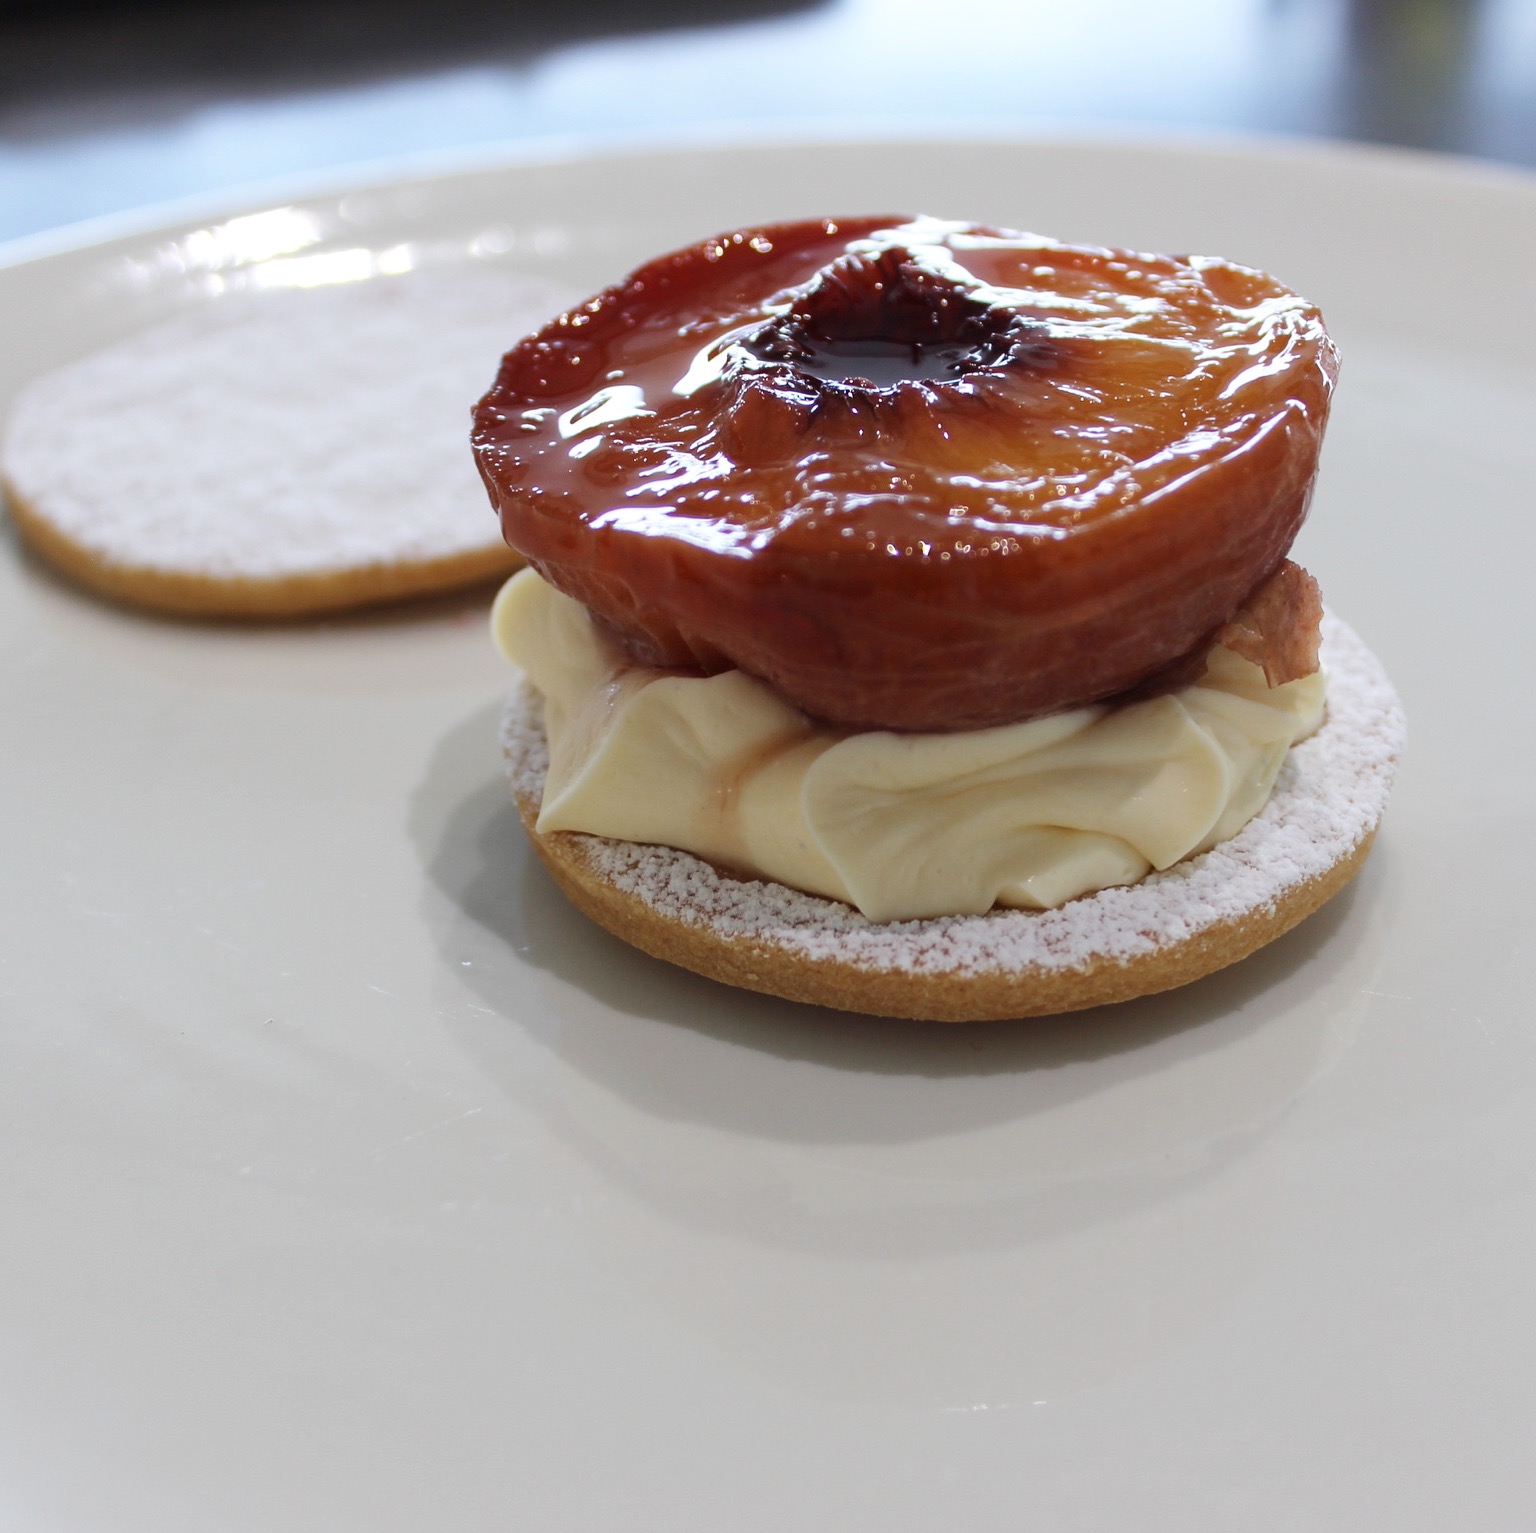 Sable of grilled peaches and mascarpone